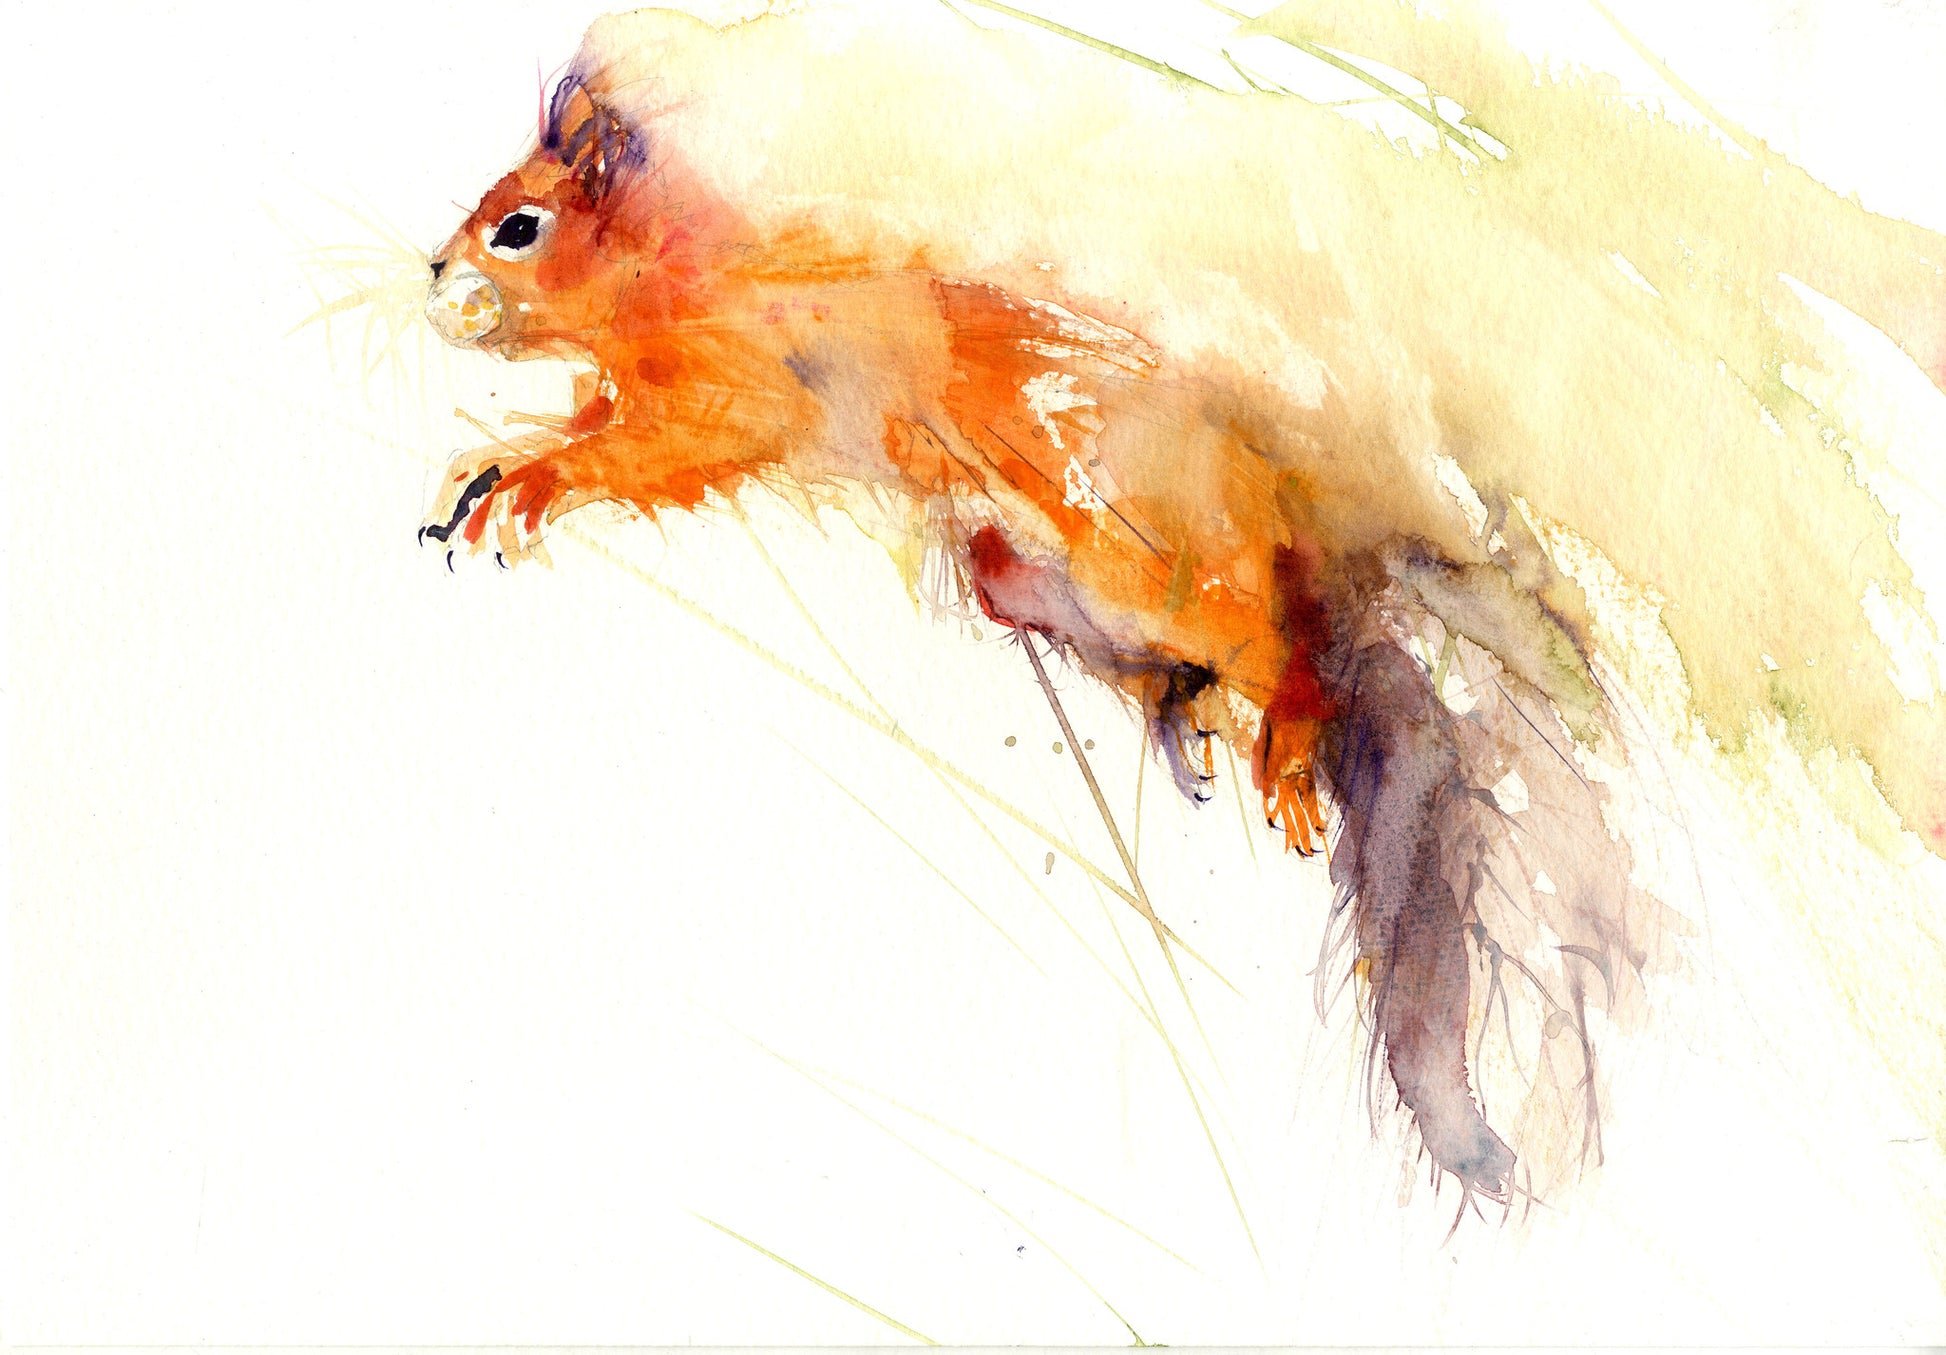 limited edition print - Red Squirrel - Jen Buckley Art limited edition animal art prints